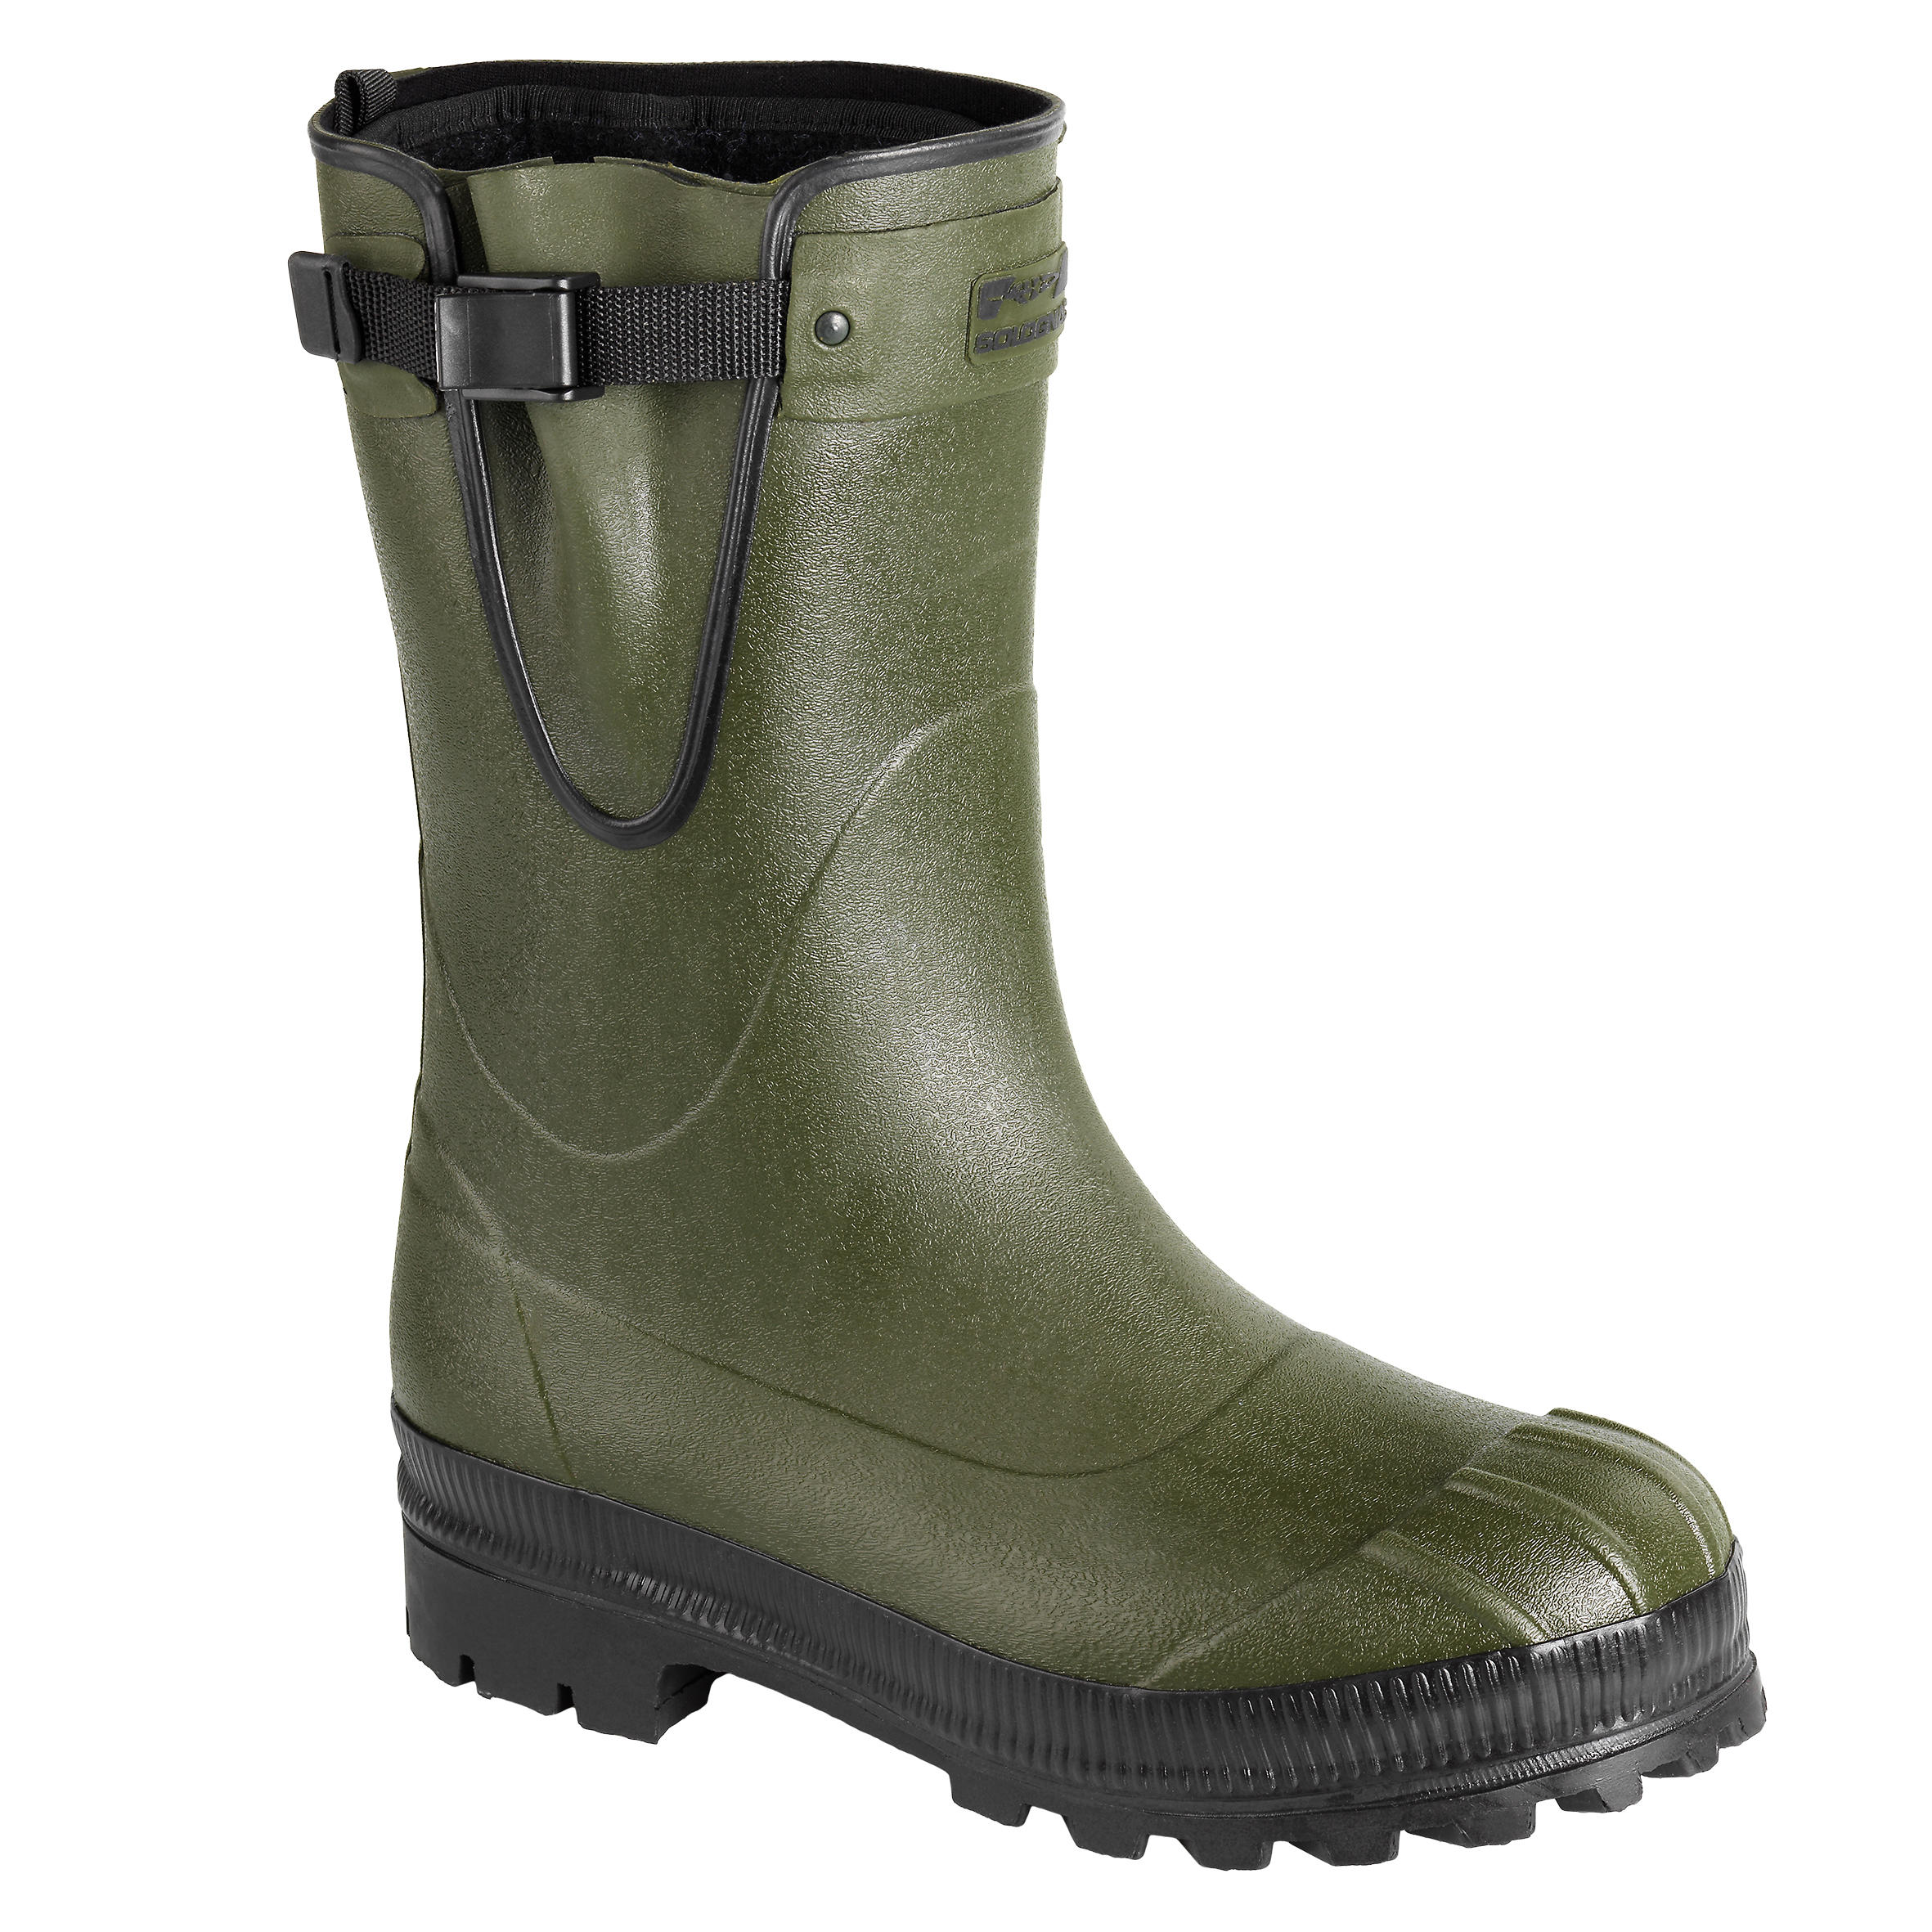 SOLOGNAC Toundra 500 short wellies with removable liner - Green